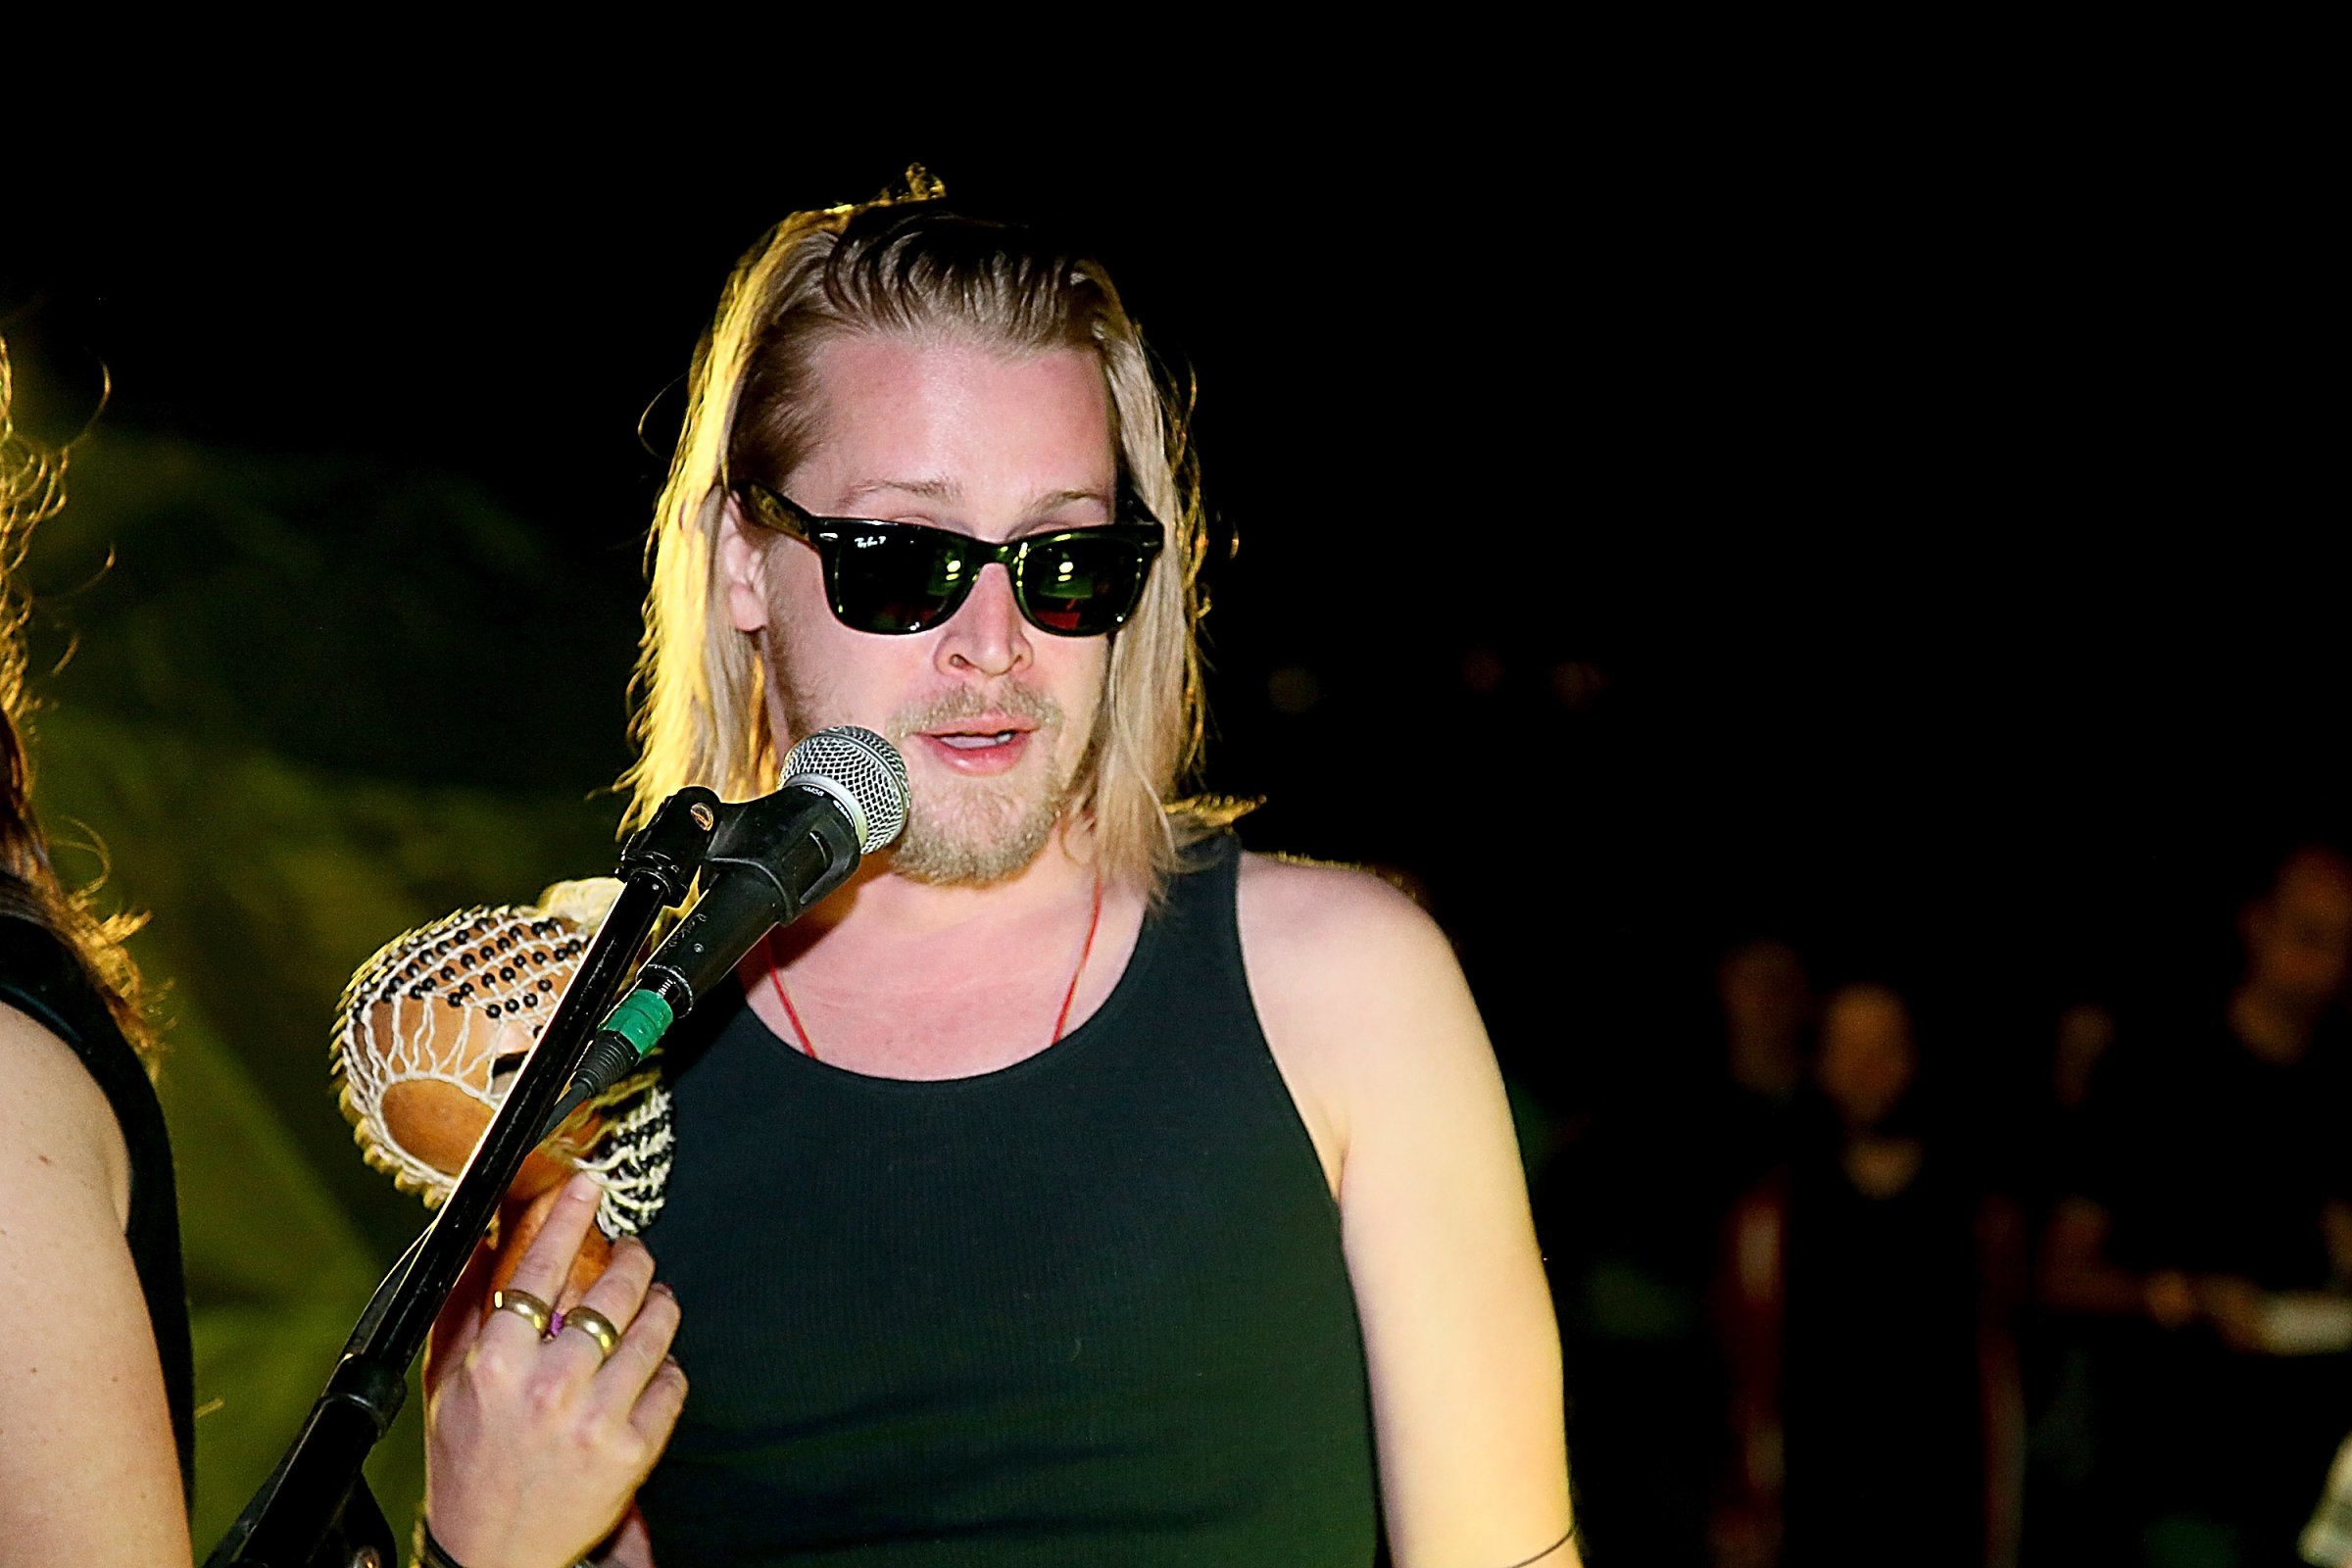 Macaulay Culkin performs with Pizza Underground at Unconventional Oven on Jan. 31, 2014 in Austin.